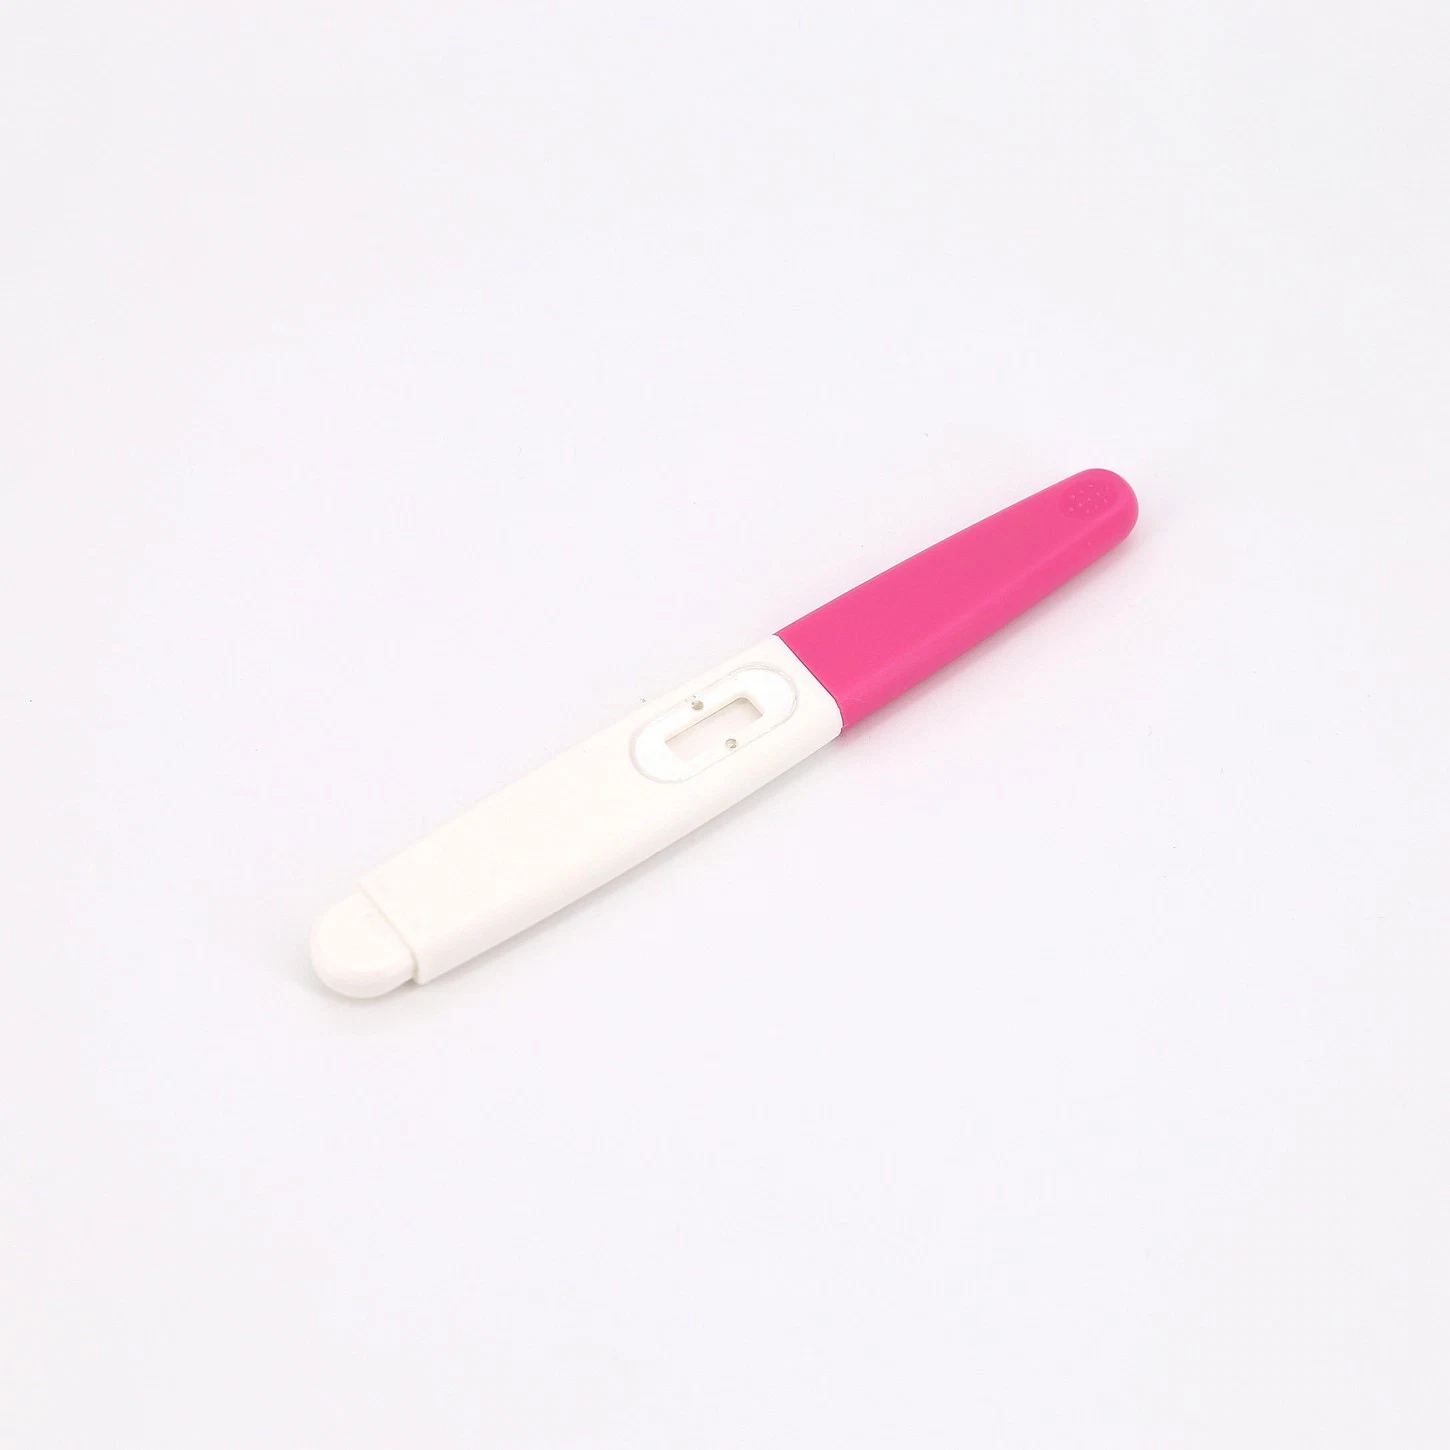 Disposable Convenient One Step Baby Check Urine HCG Pregnancy Rapid Test Pen Type Midstream for Home Use